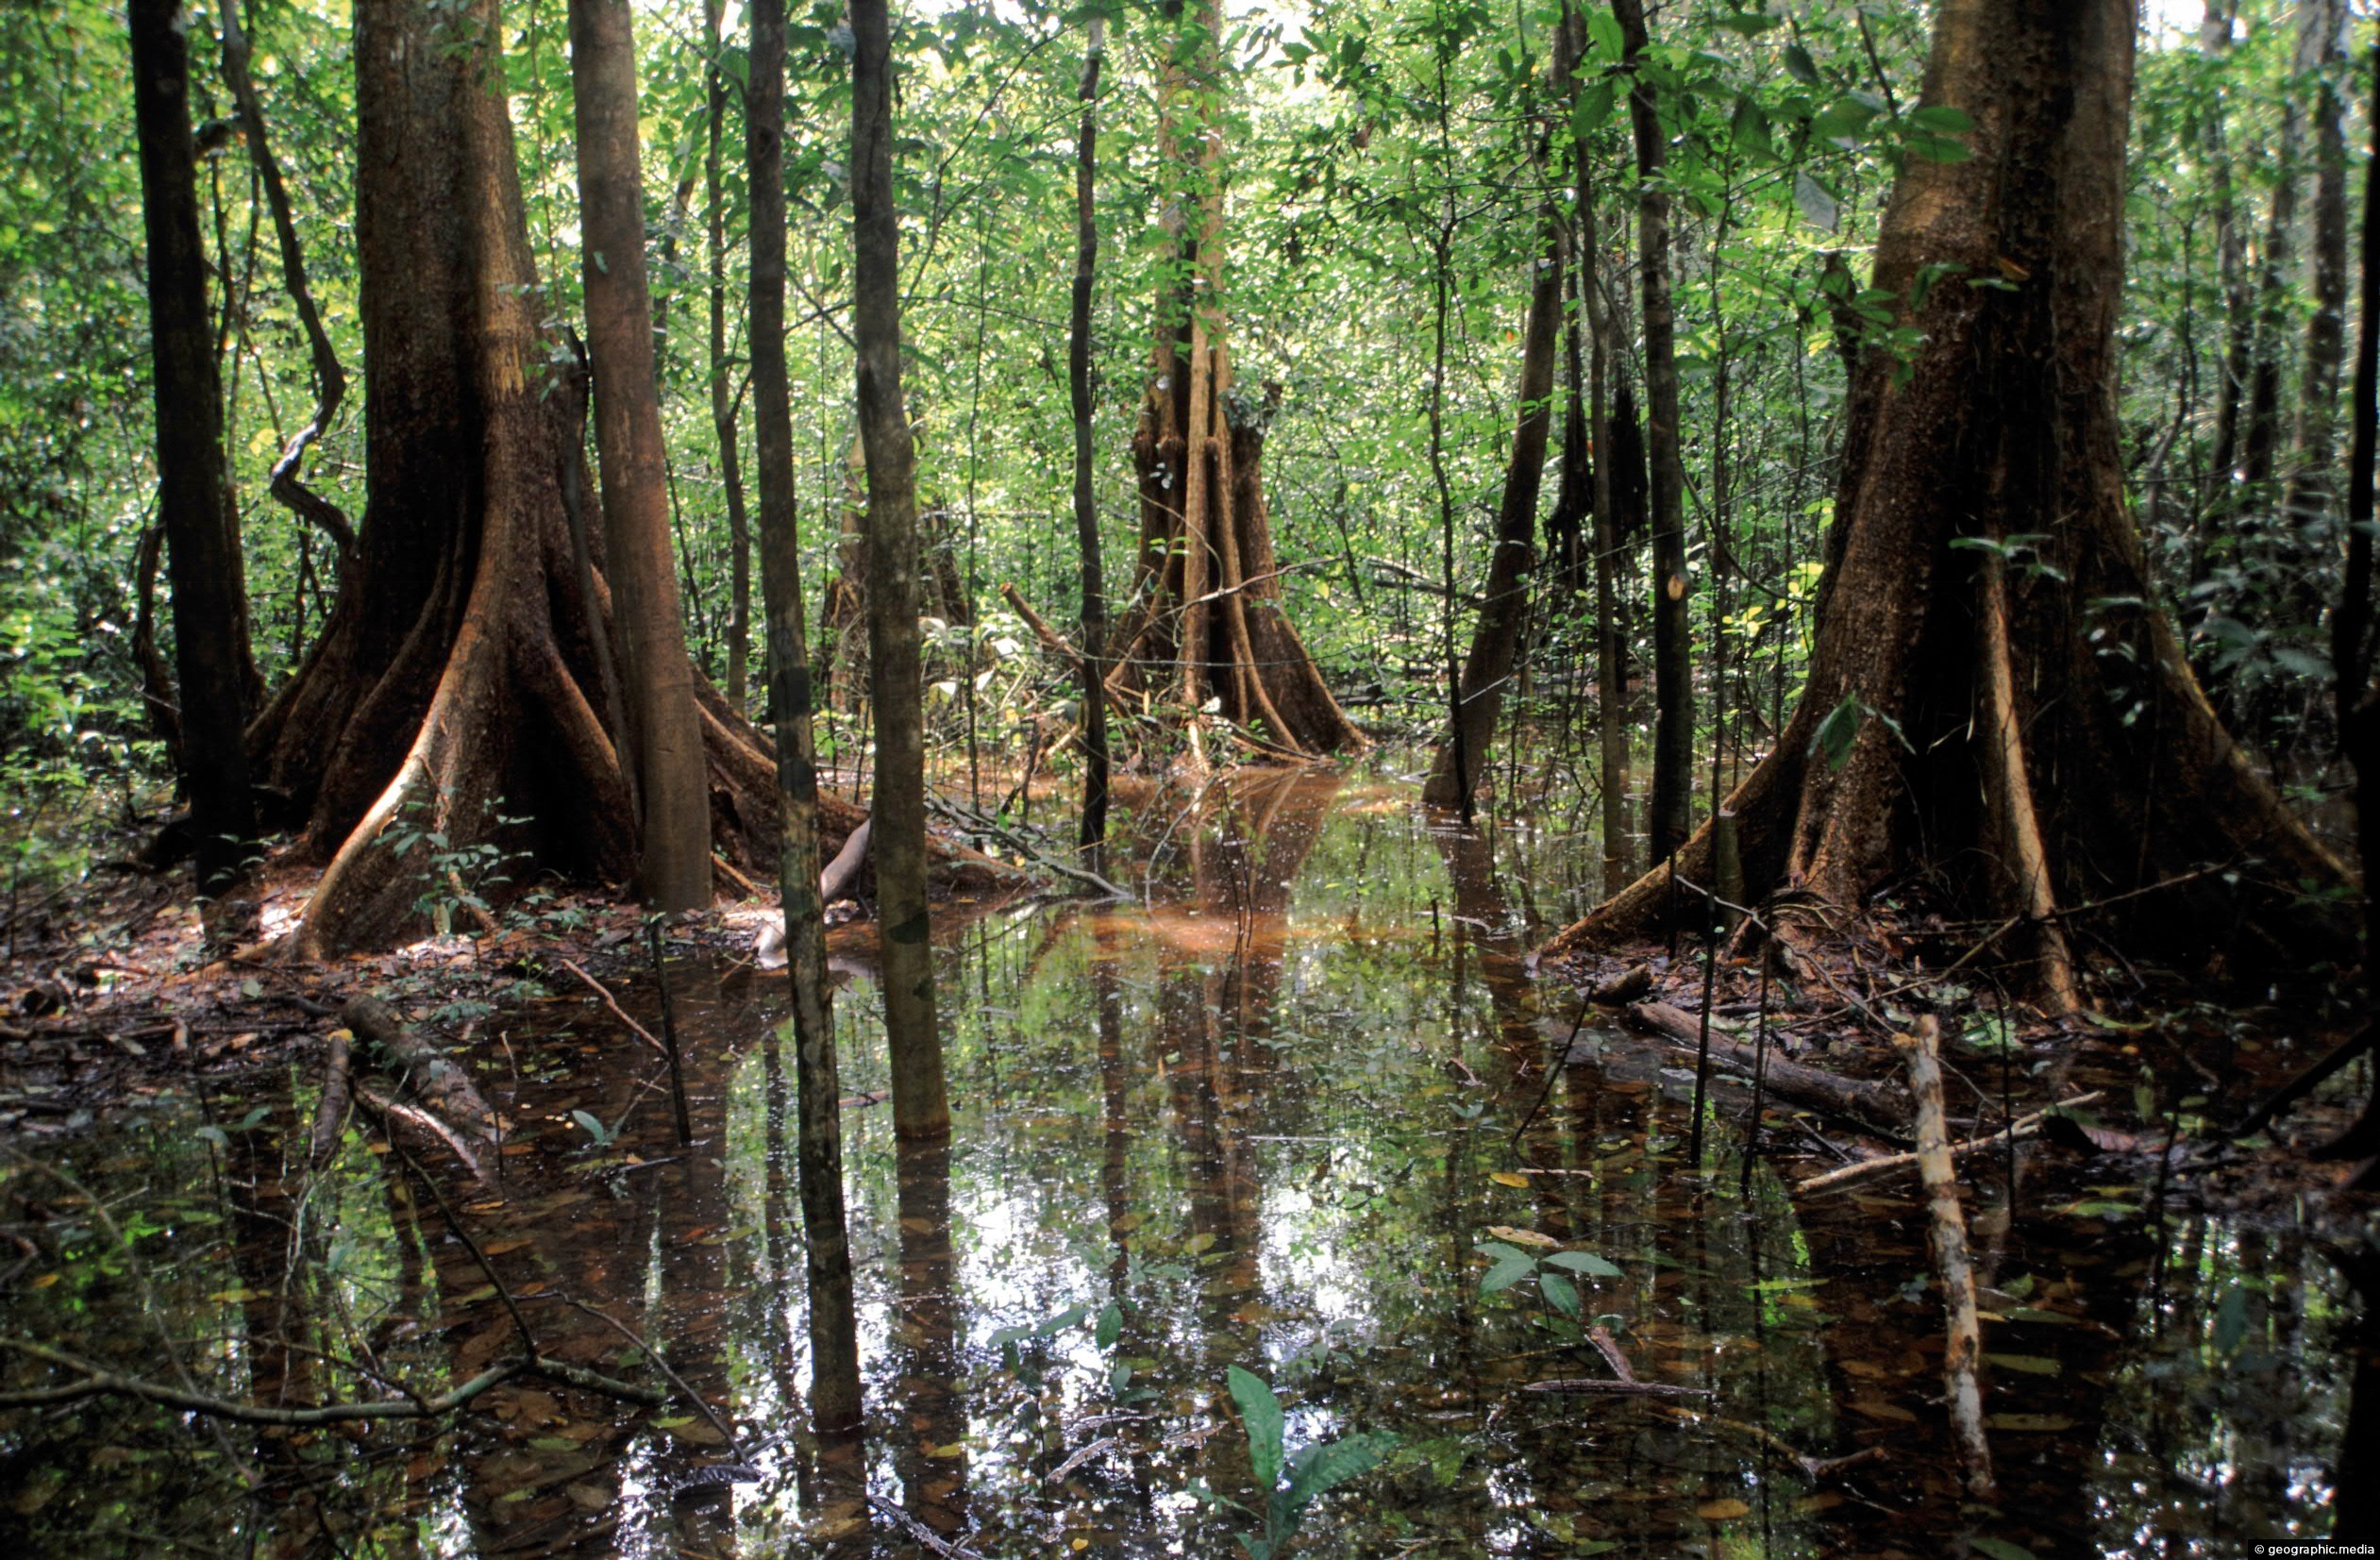 Flooded Forest in the Amazon Rainforest